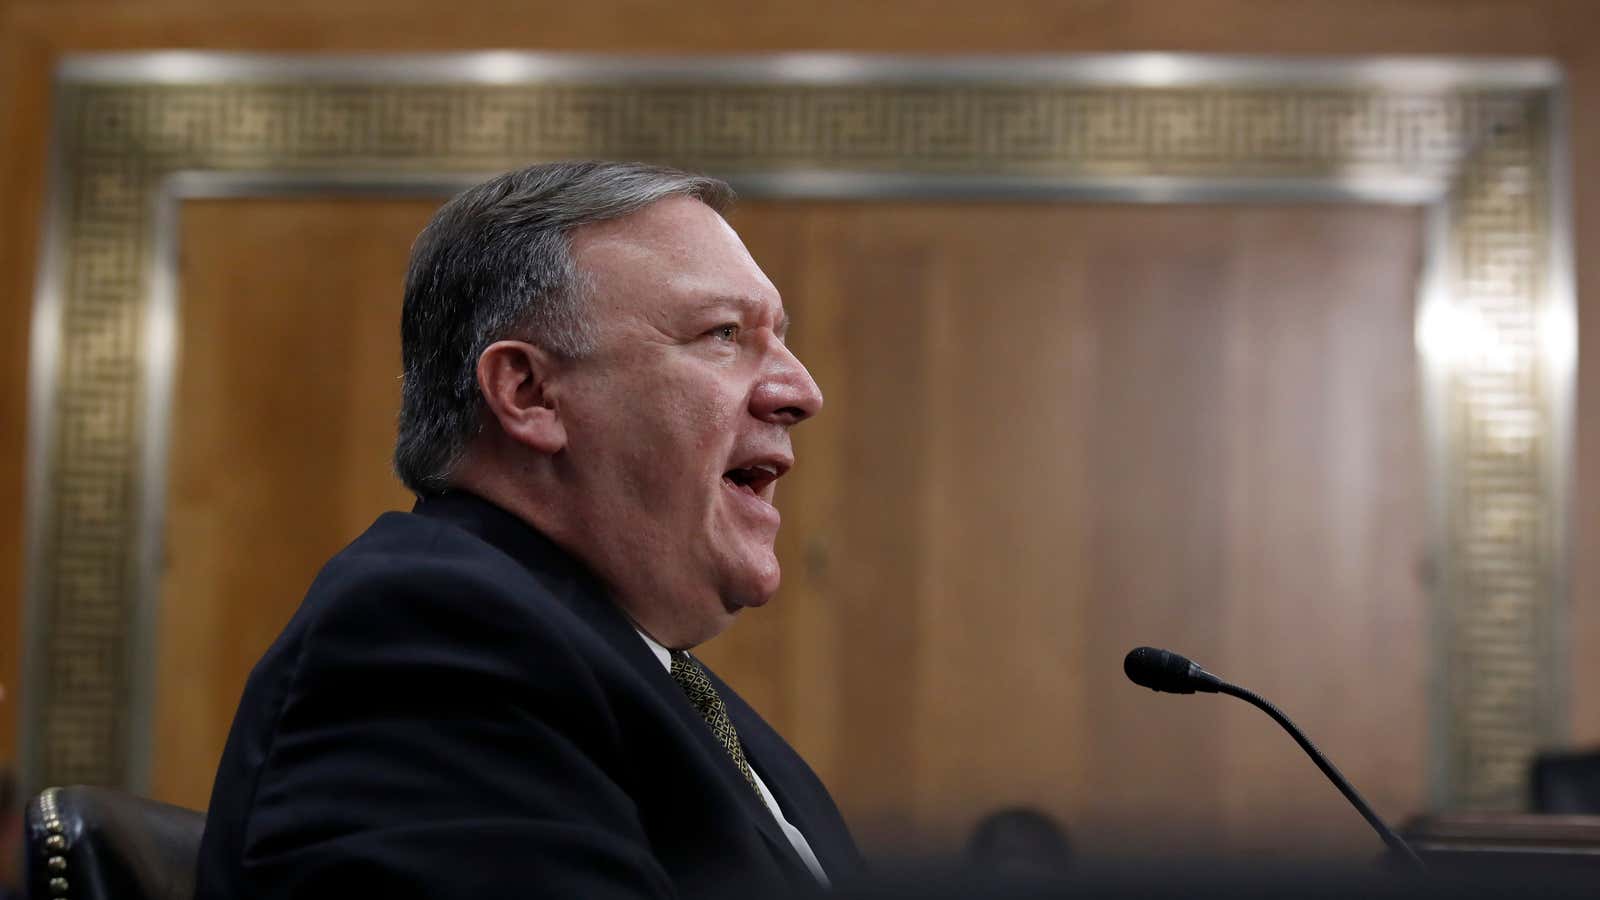 Pompeo acknowledged there was “a human component” in global warming.